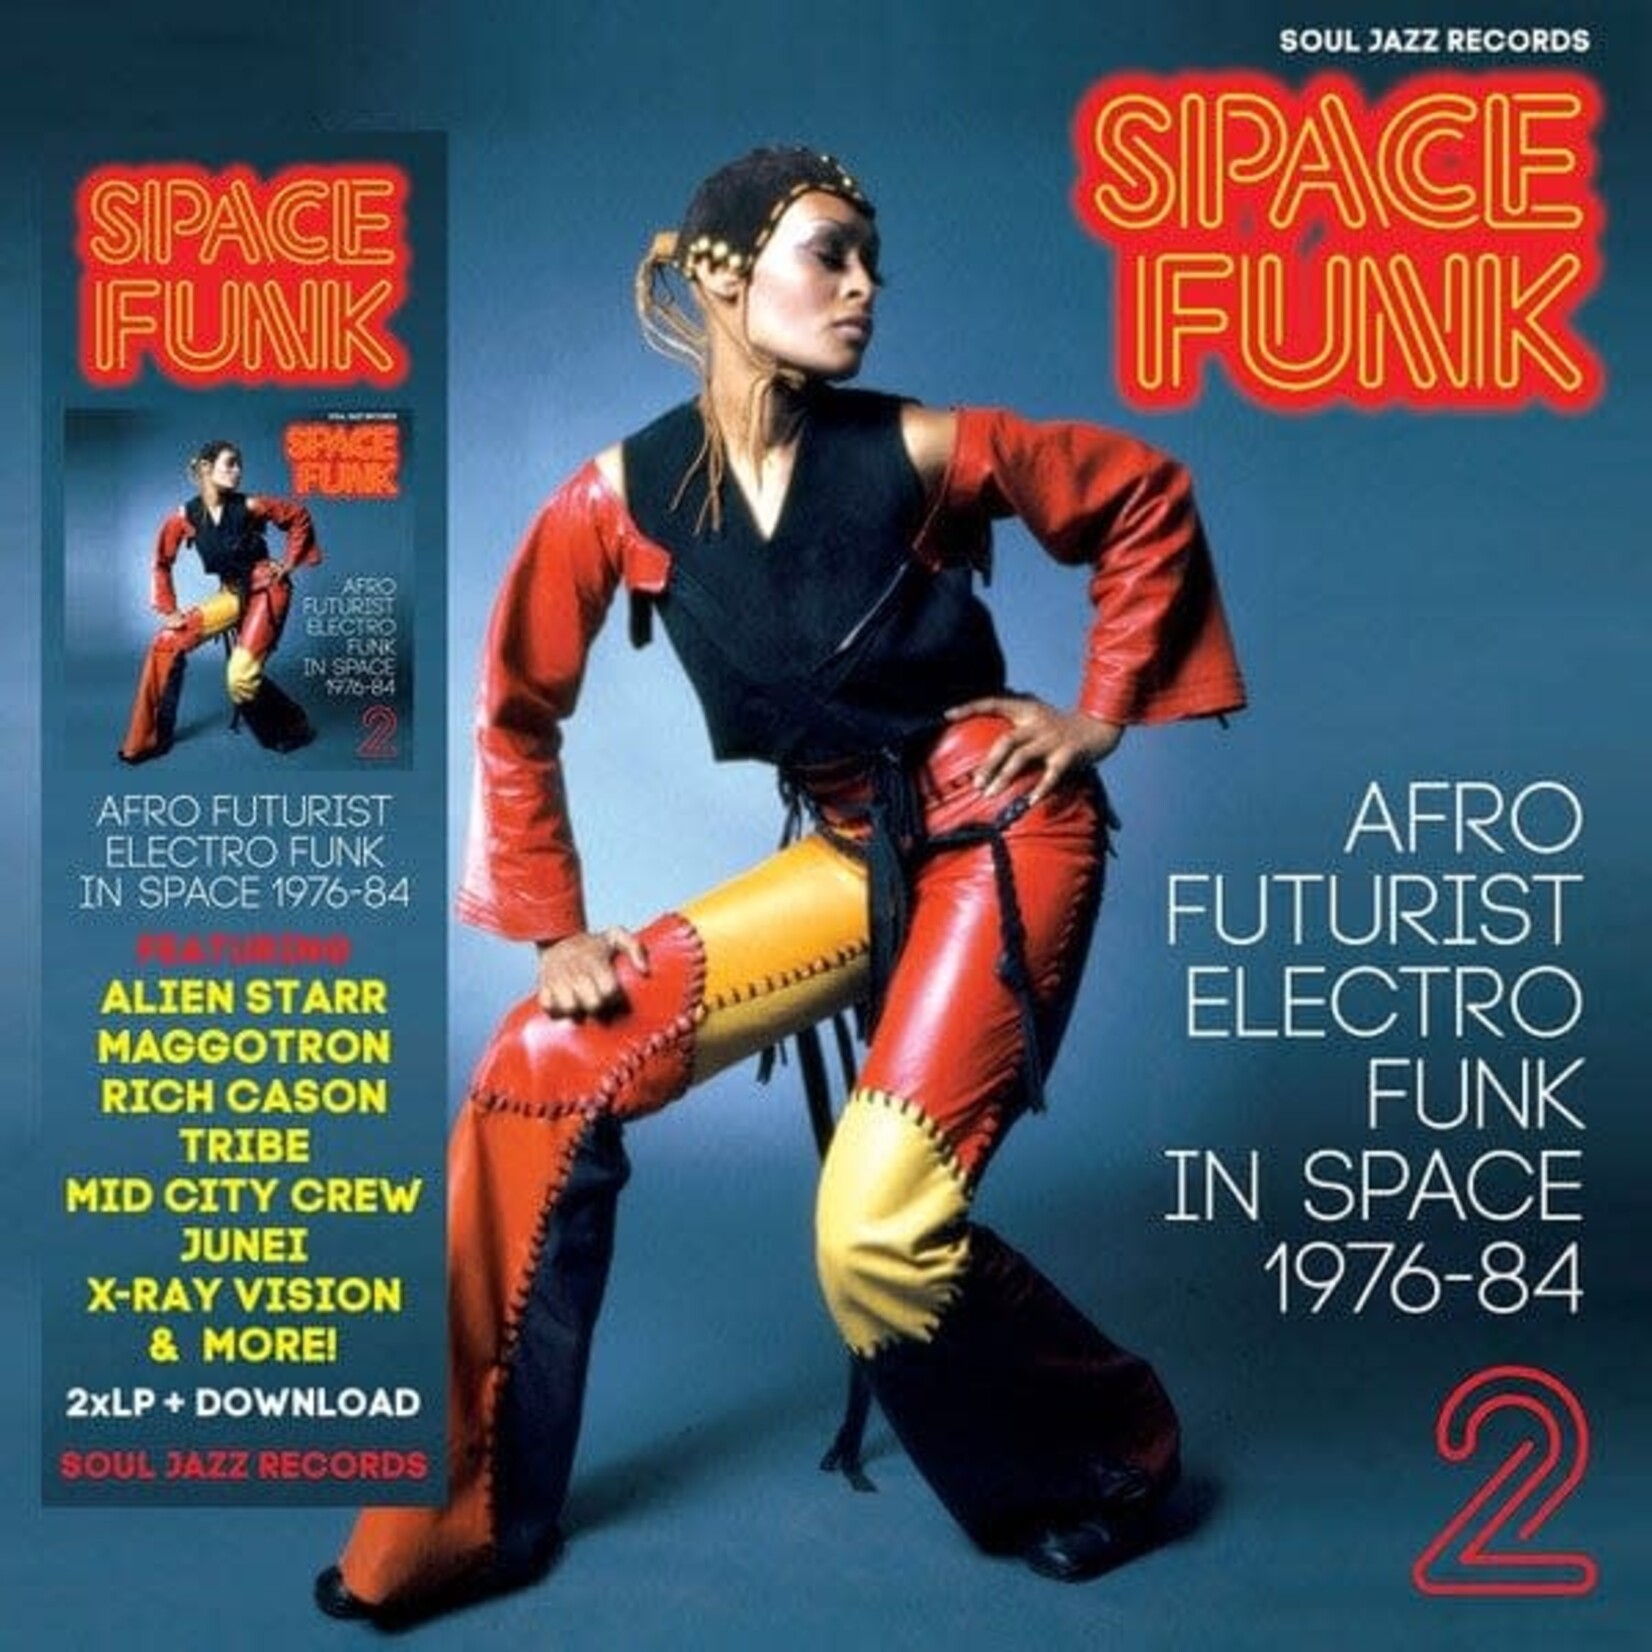 [New] Various Artists - Space Funk 2: Afro Futurist Electro Funk In Space 1976-84 (2LP)